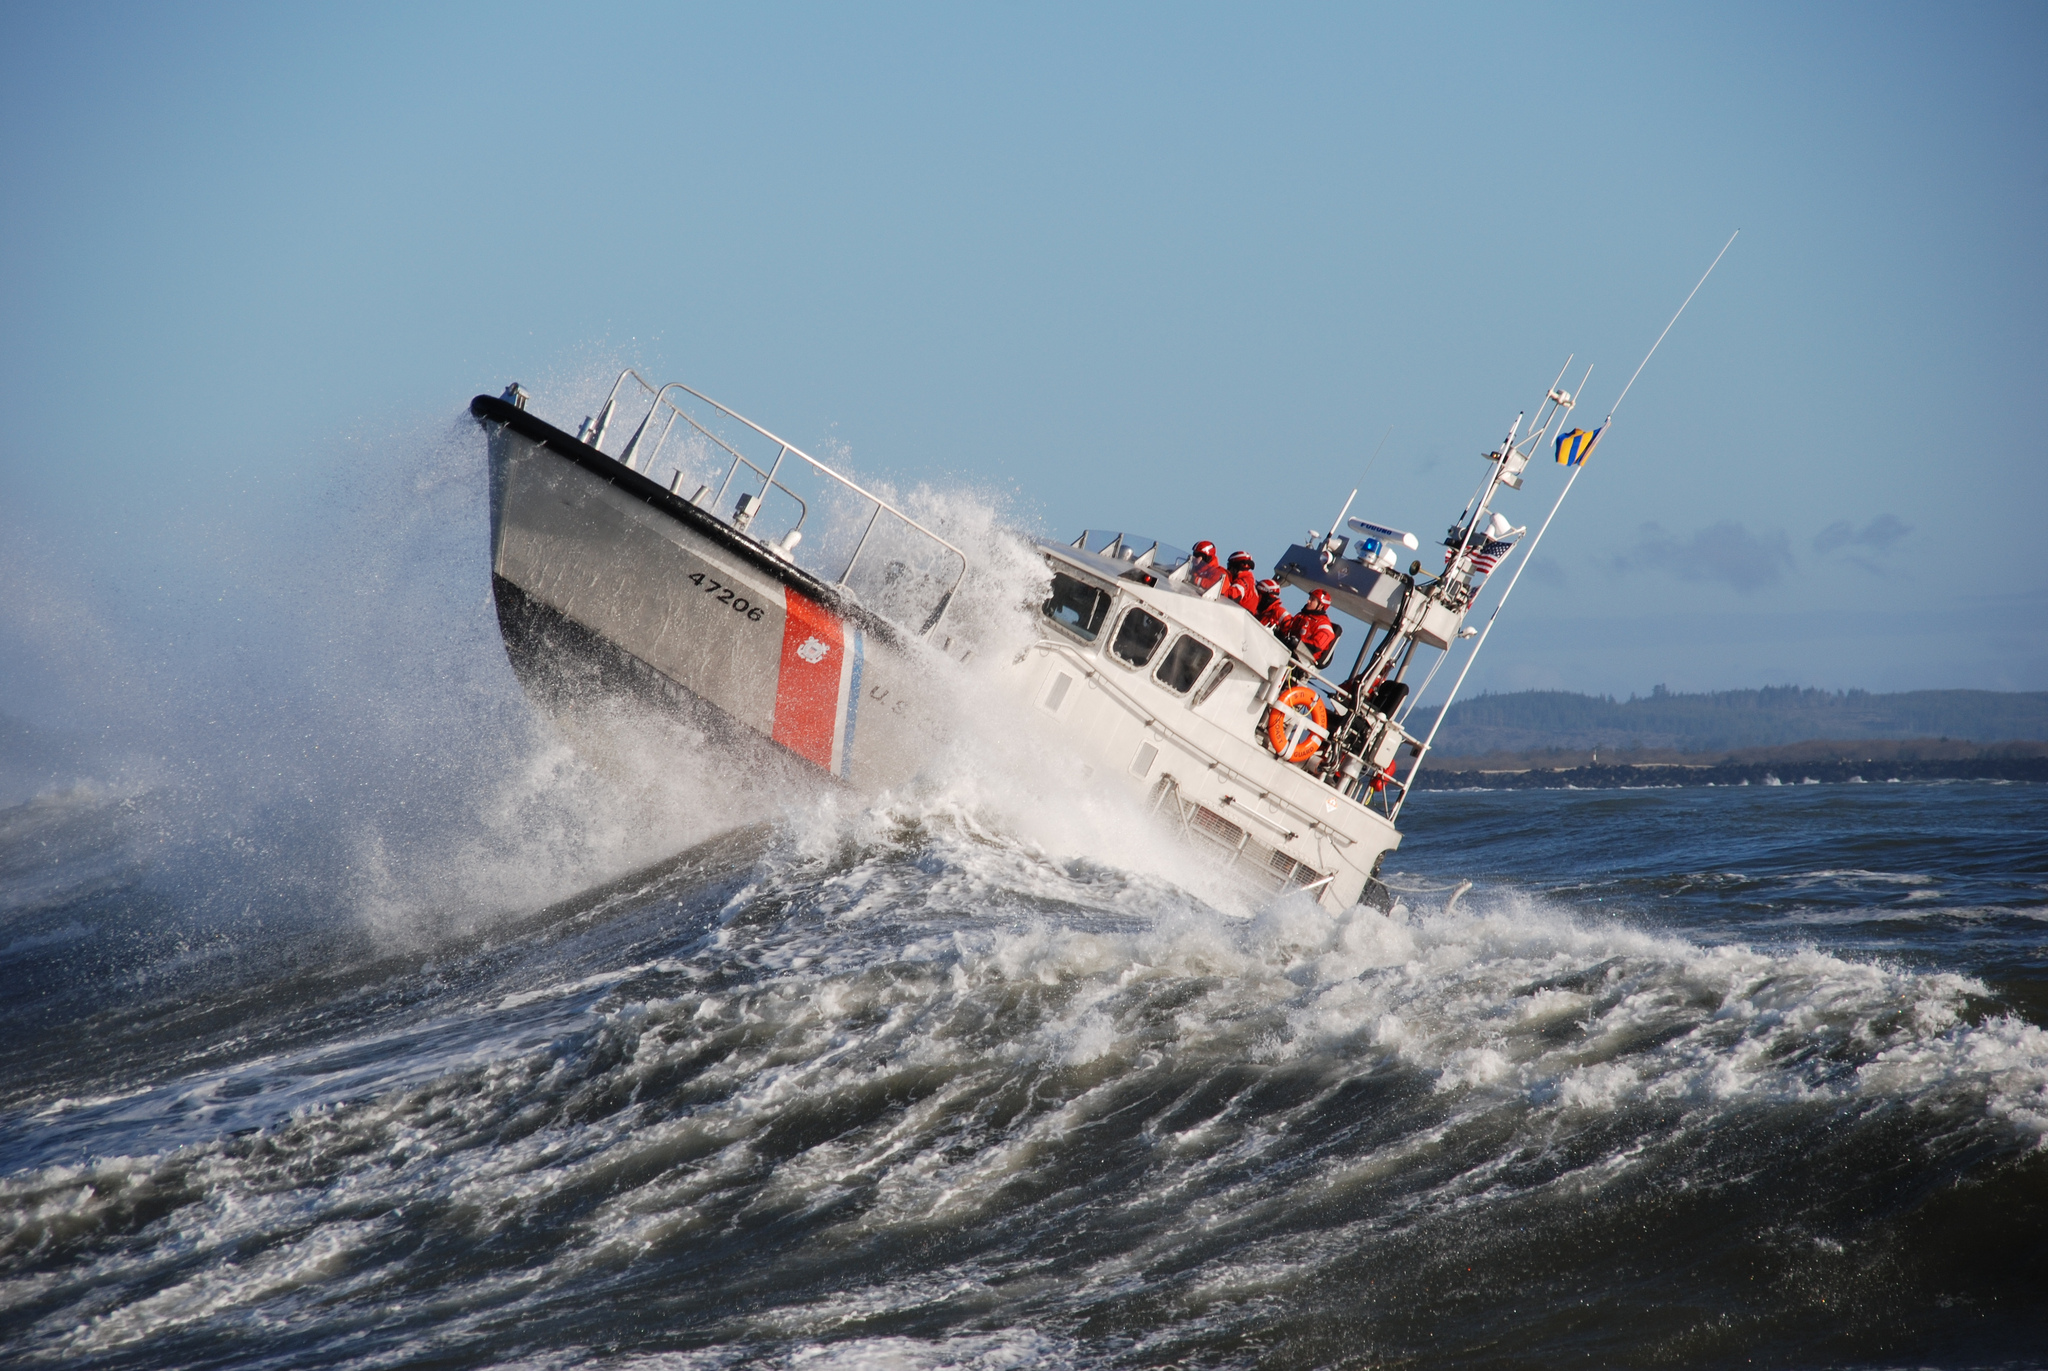 The United States Coast Guard: Expect the Unexpected